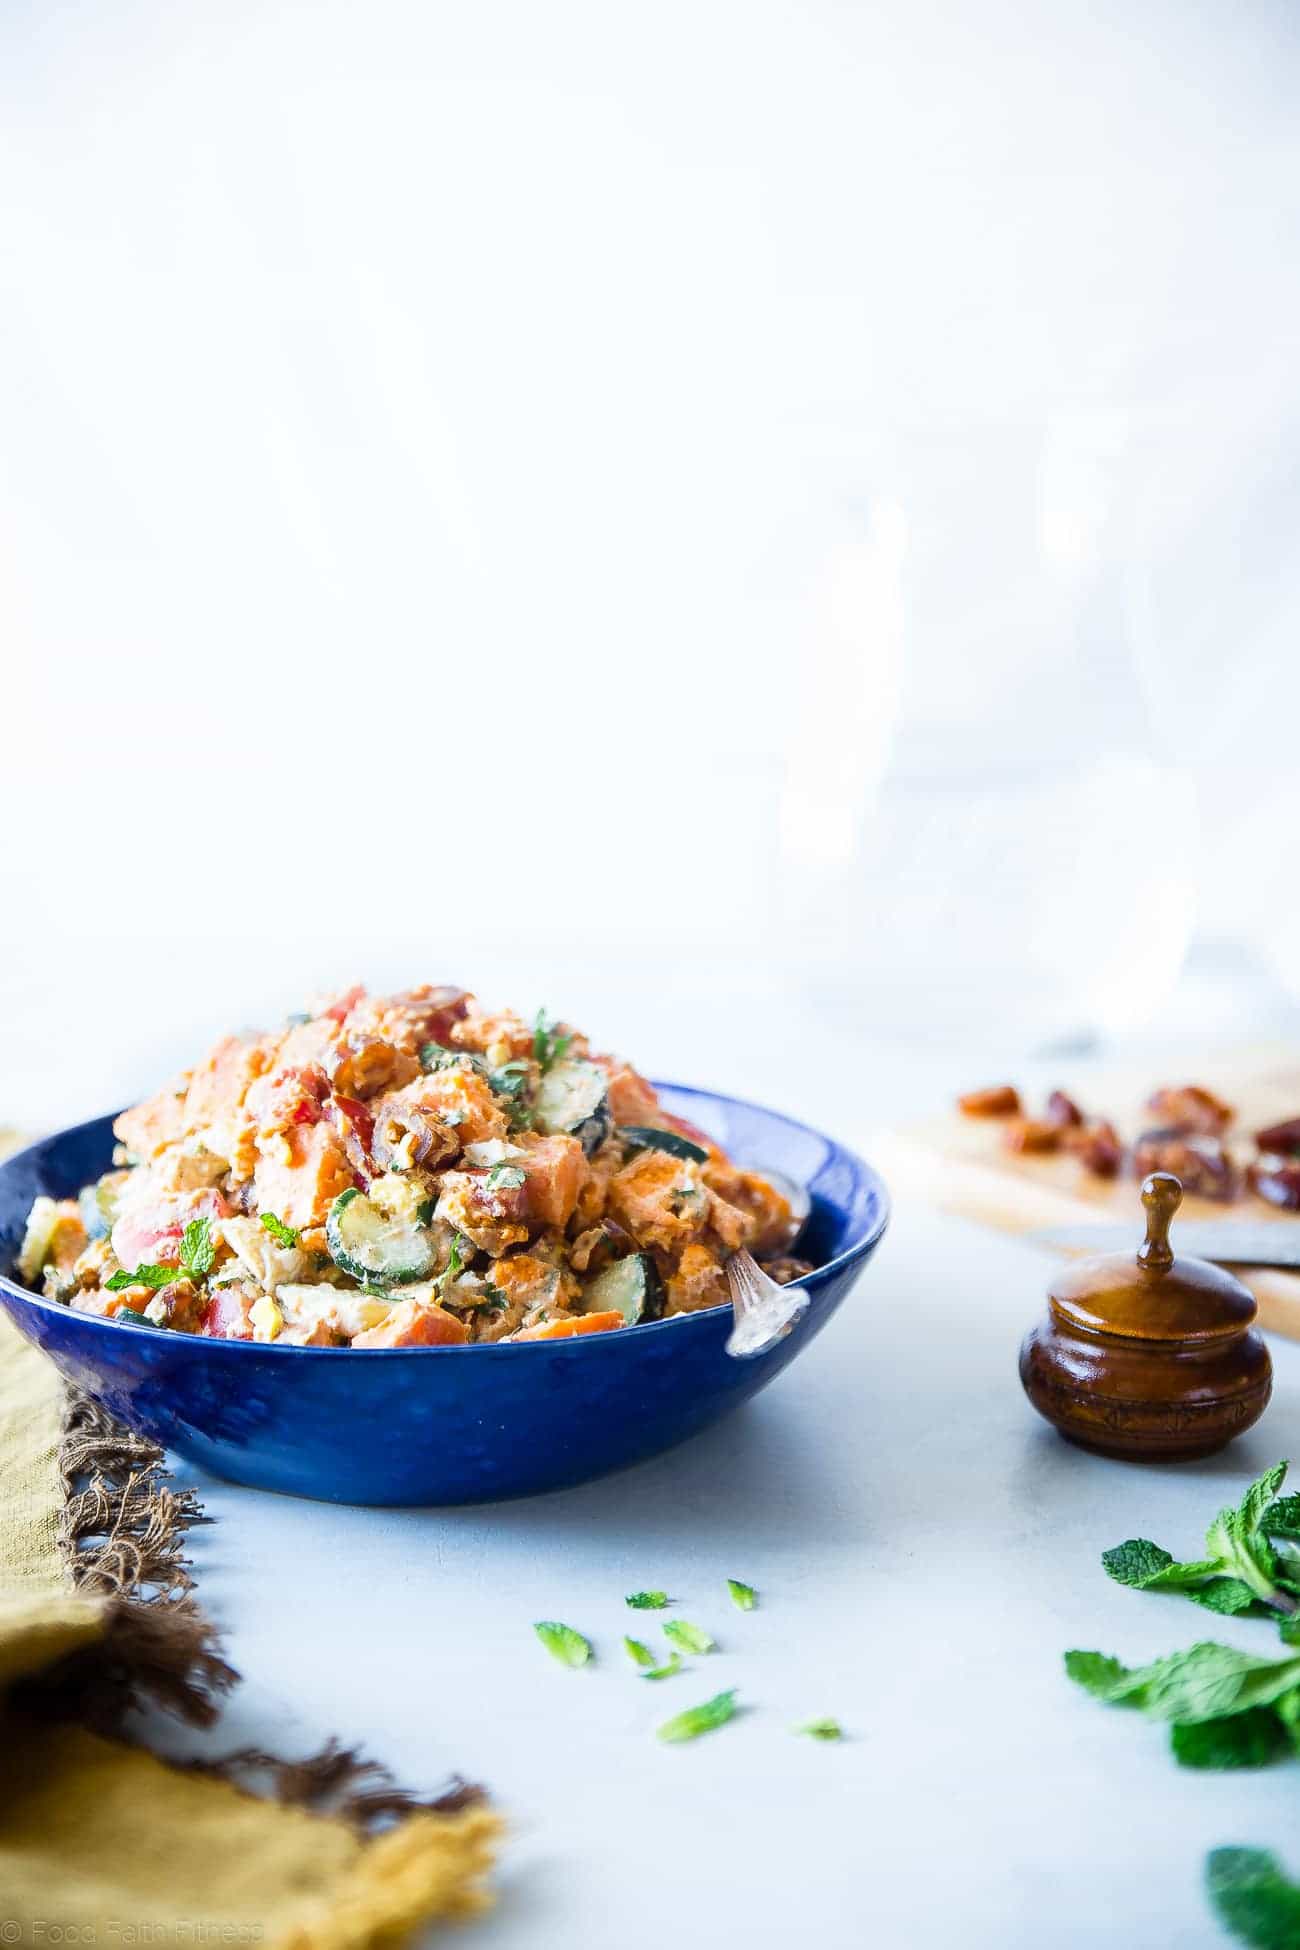 Whole30 Moroccan Sweet Potato Salad - This easy paleo Moroccan Sweet Potato Salad is loaded with the spicy-sweet flavor of the Middle-East! It's a healthy, dairy-free summer side dish with a vegan option! | Foodfaithfitness.com | @FoodFaithFit